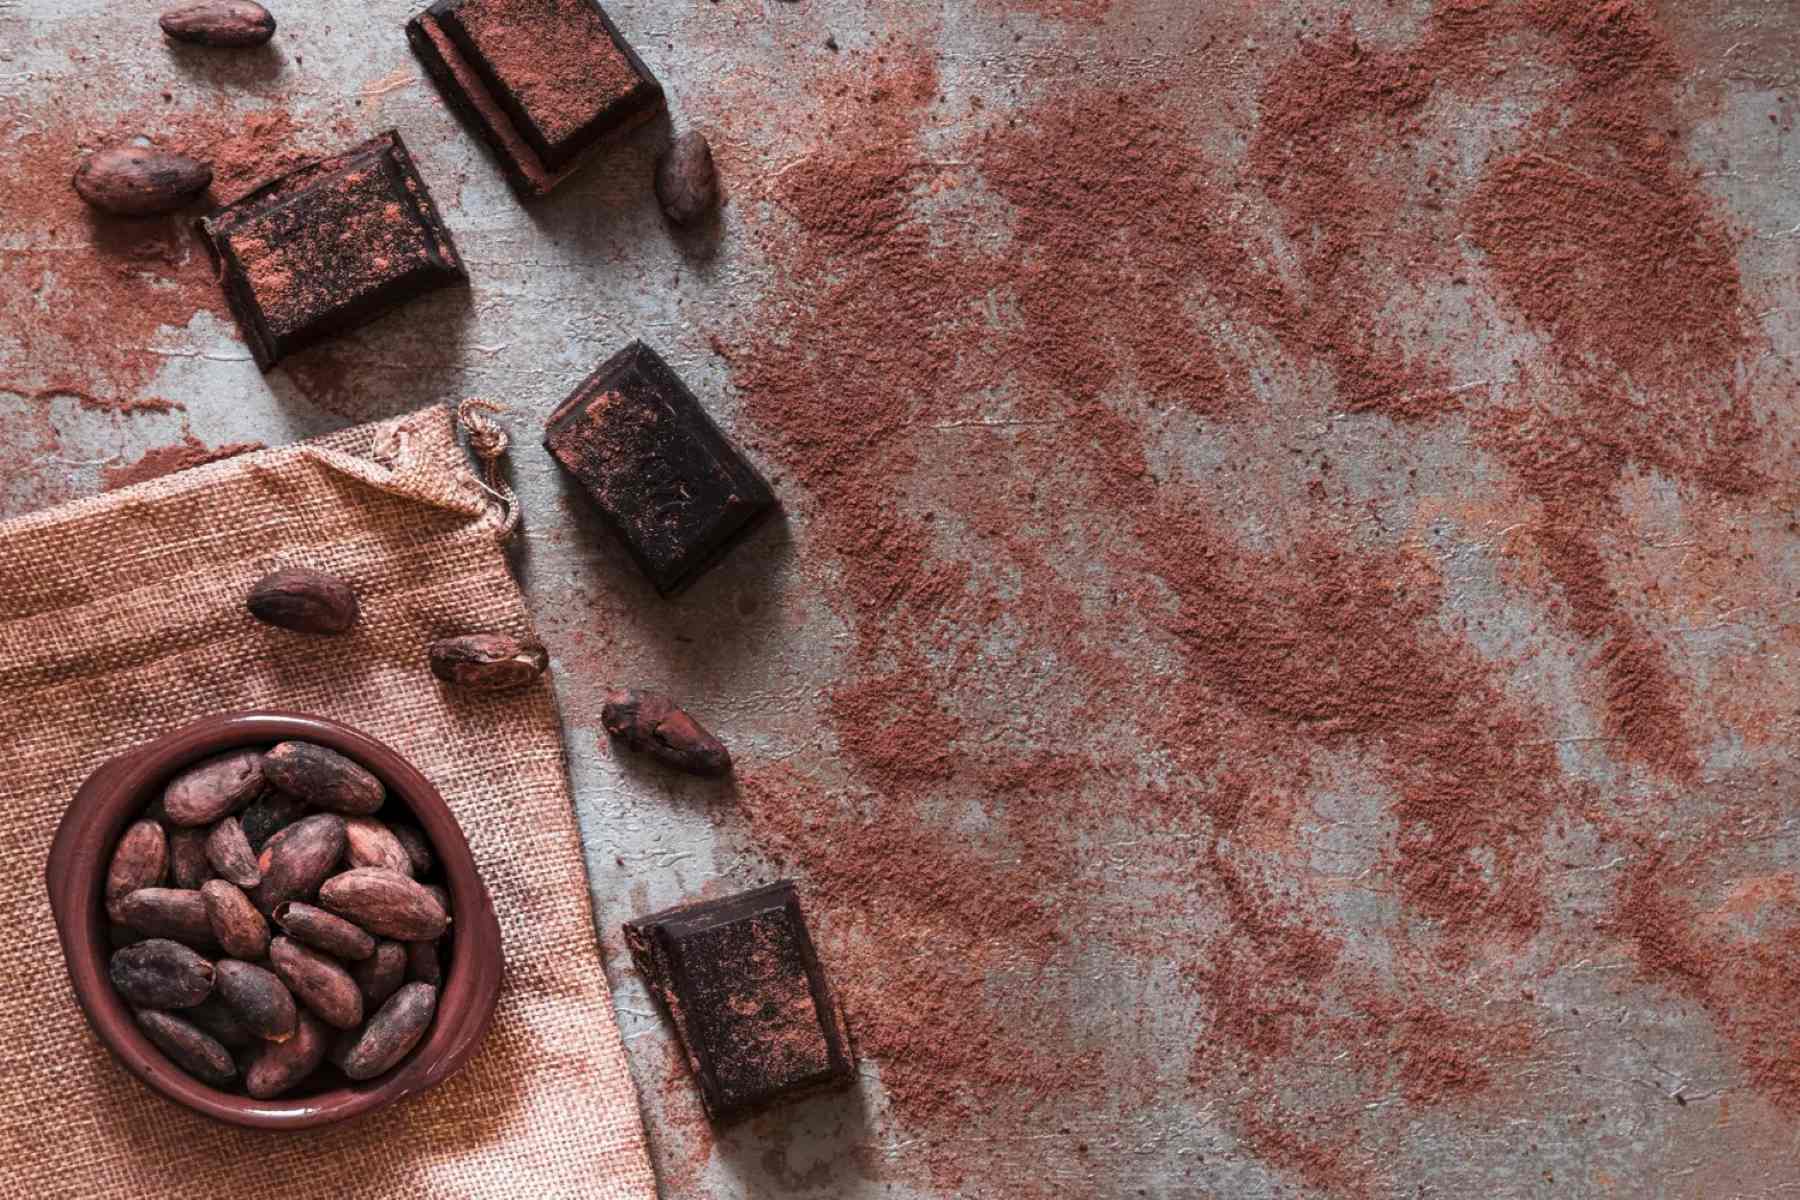 The Surprising Health Risks Of Adding Cocoa Powder To Your Coffee